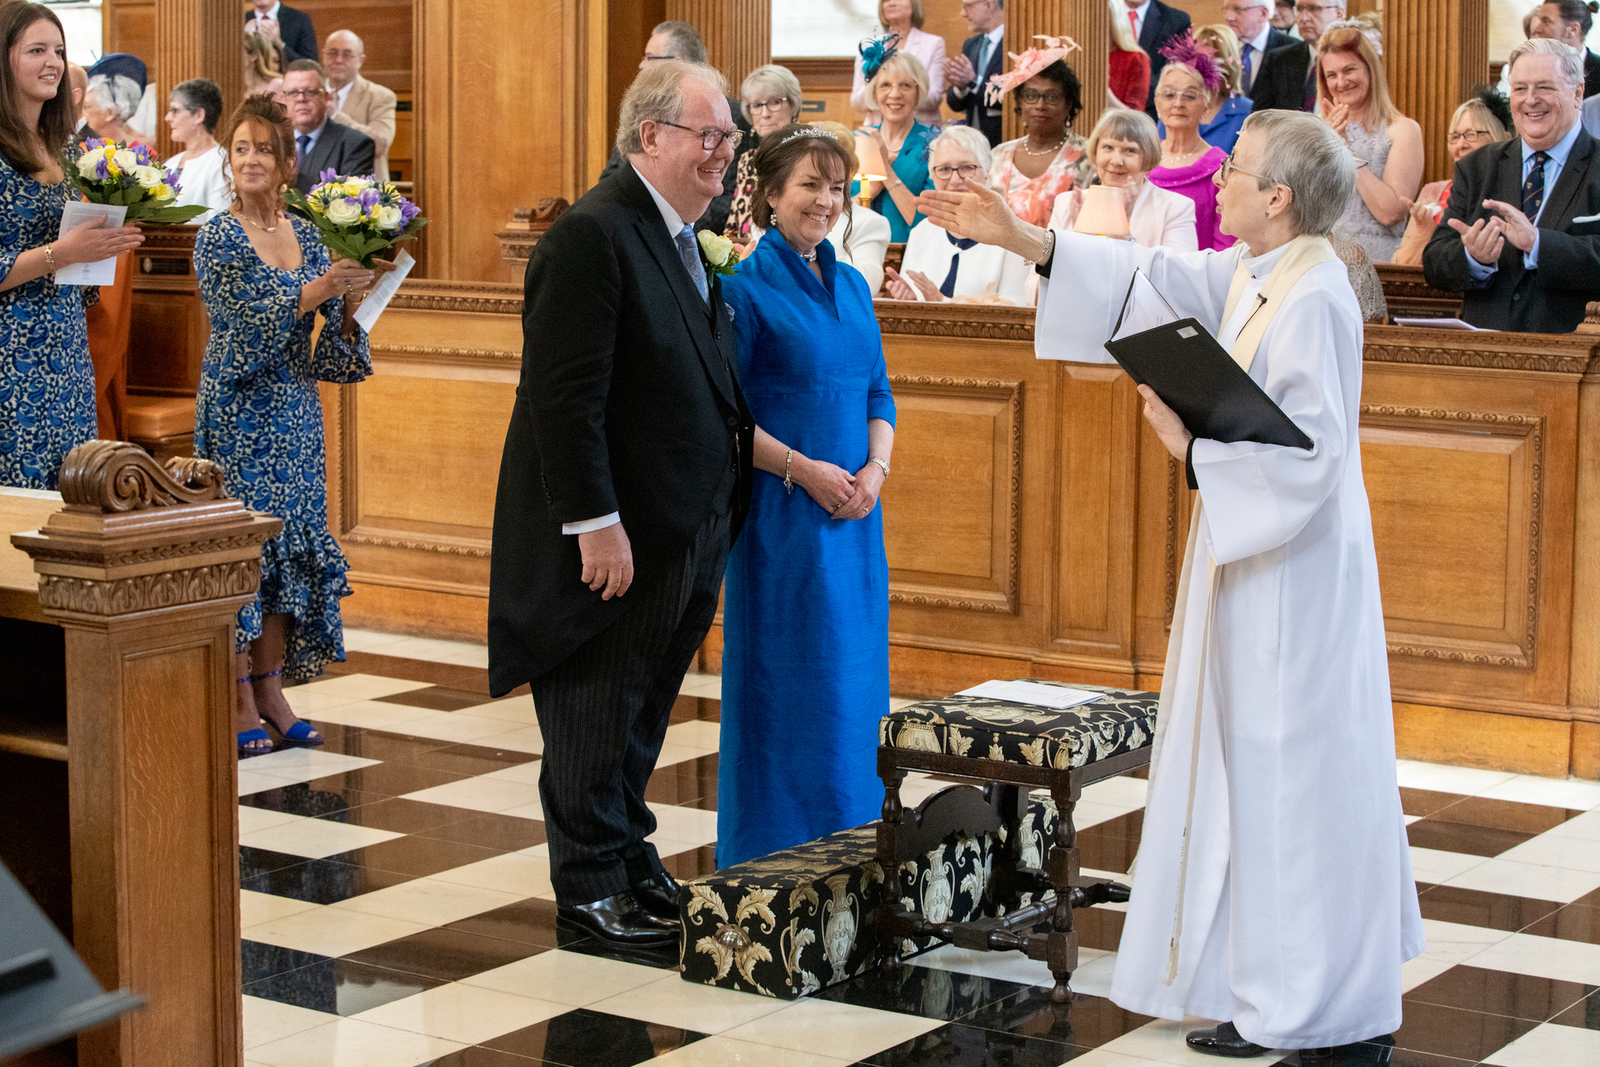 20 May 2023 - What an amazing day - Marian and I tied the knot ! The Revd Canon Dr Alison Joyce conducted our wedding service at St Brides.